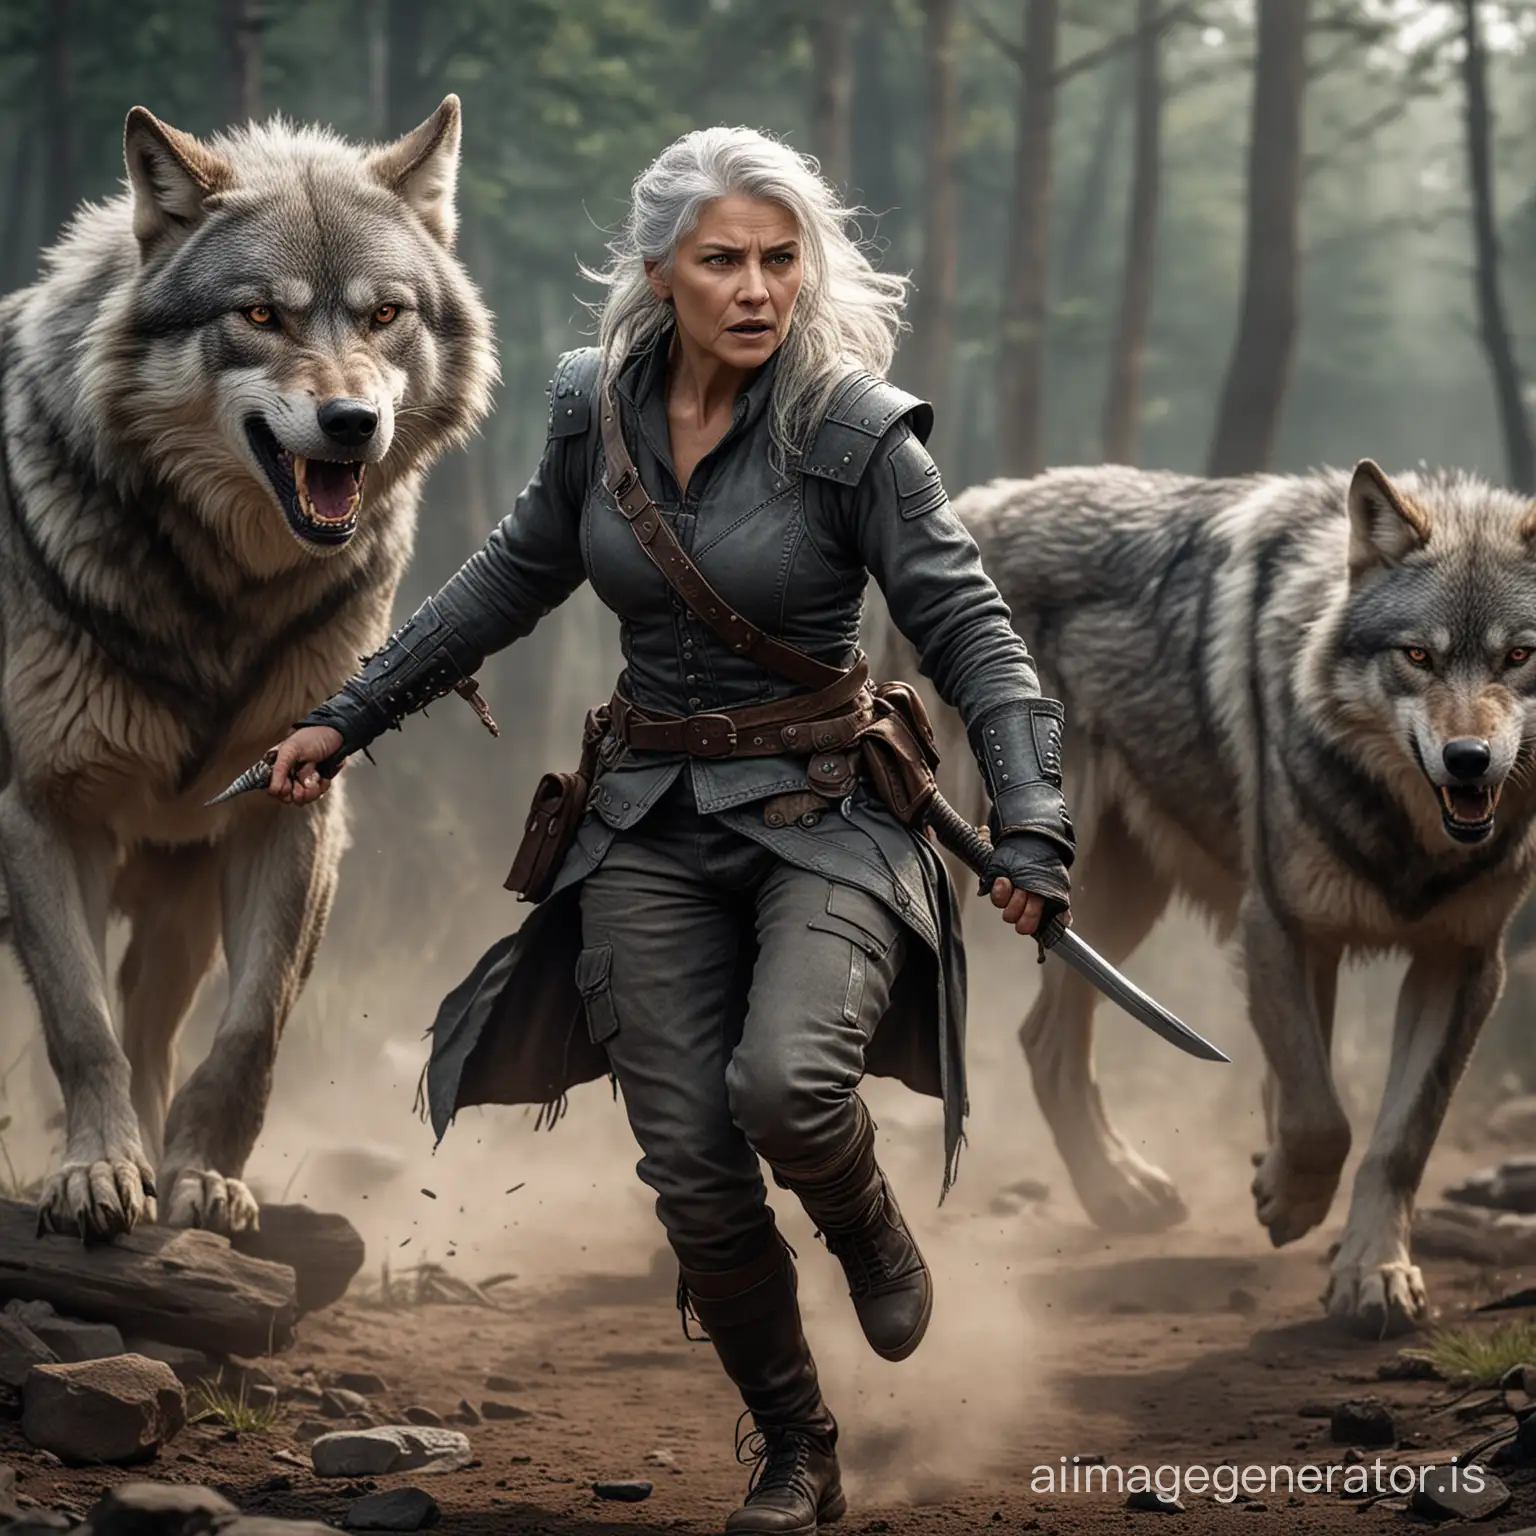 Resilient-GreyHaired-She-Wolf-Warrior-in-Battle